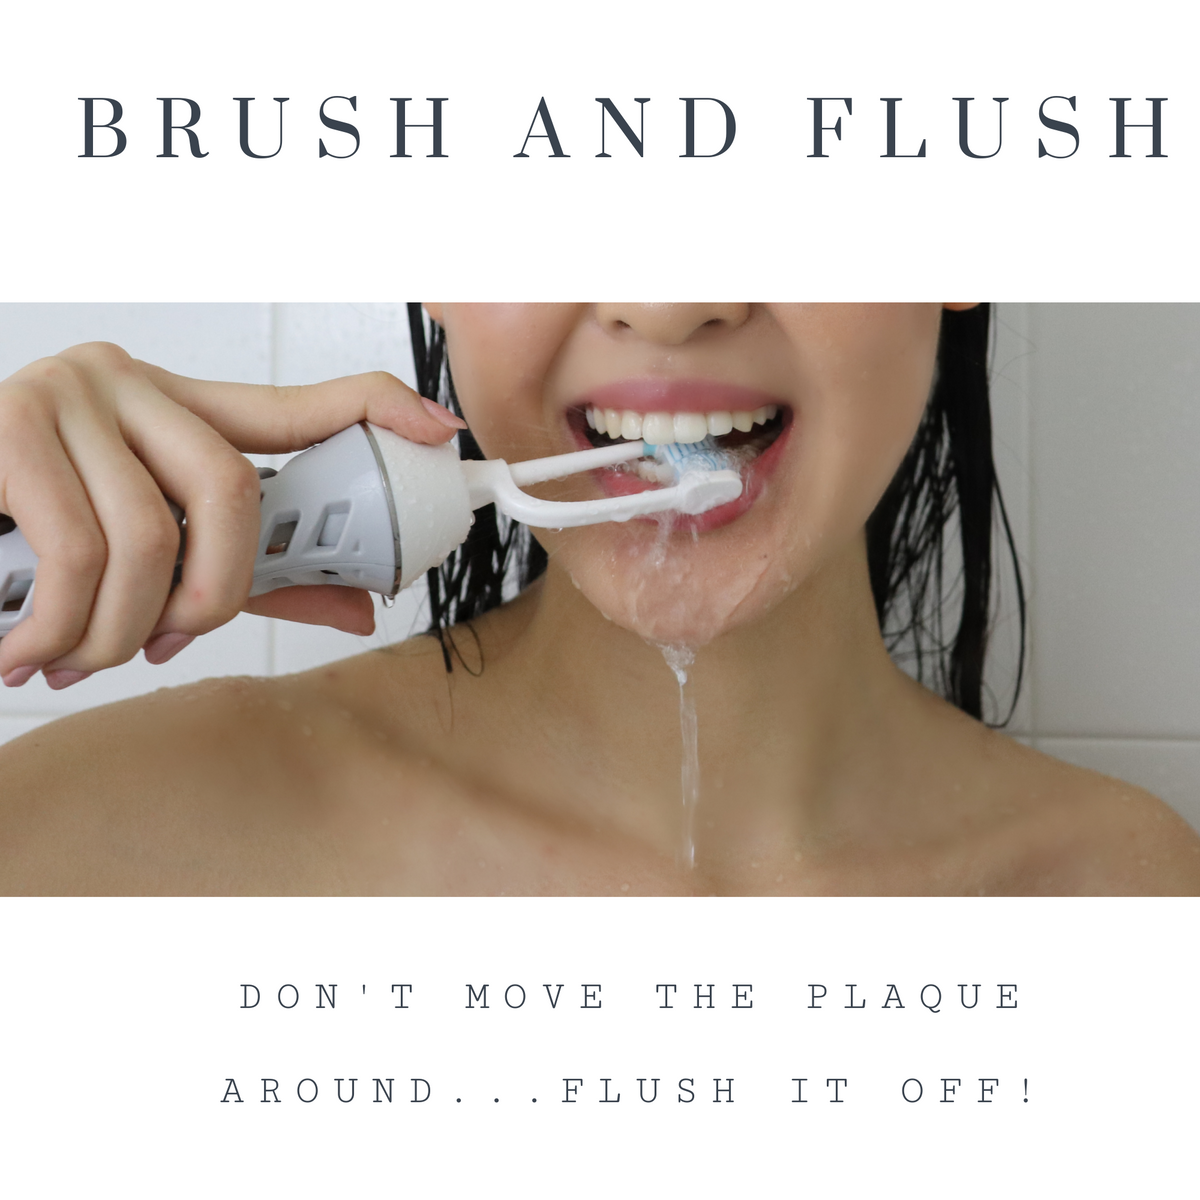 Brushing your teeth and water floss, both sides of your teeth with ToothShower water flossing dual headed toothbrush. 